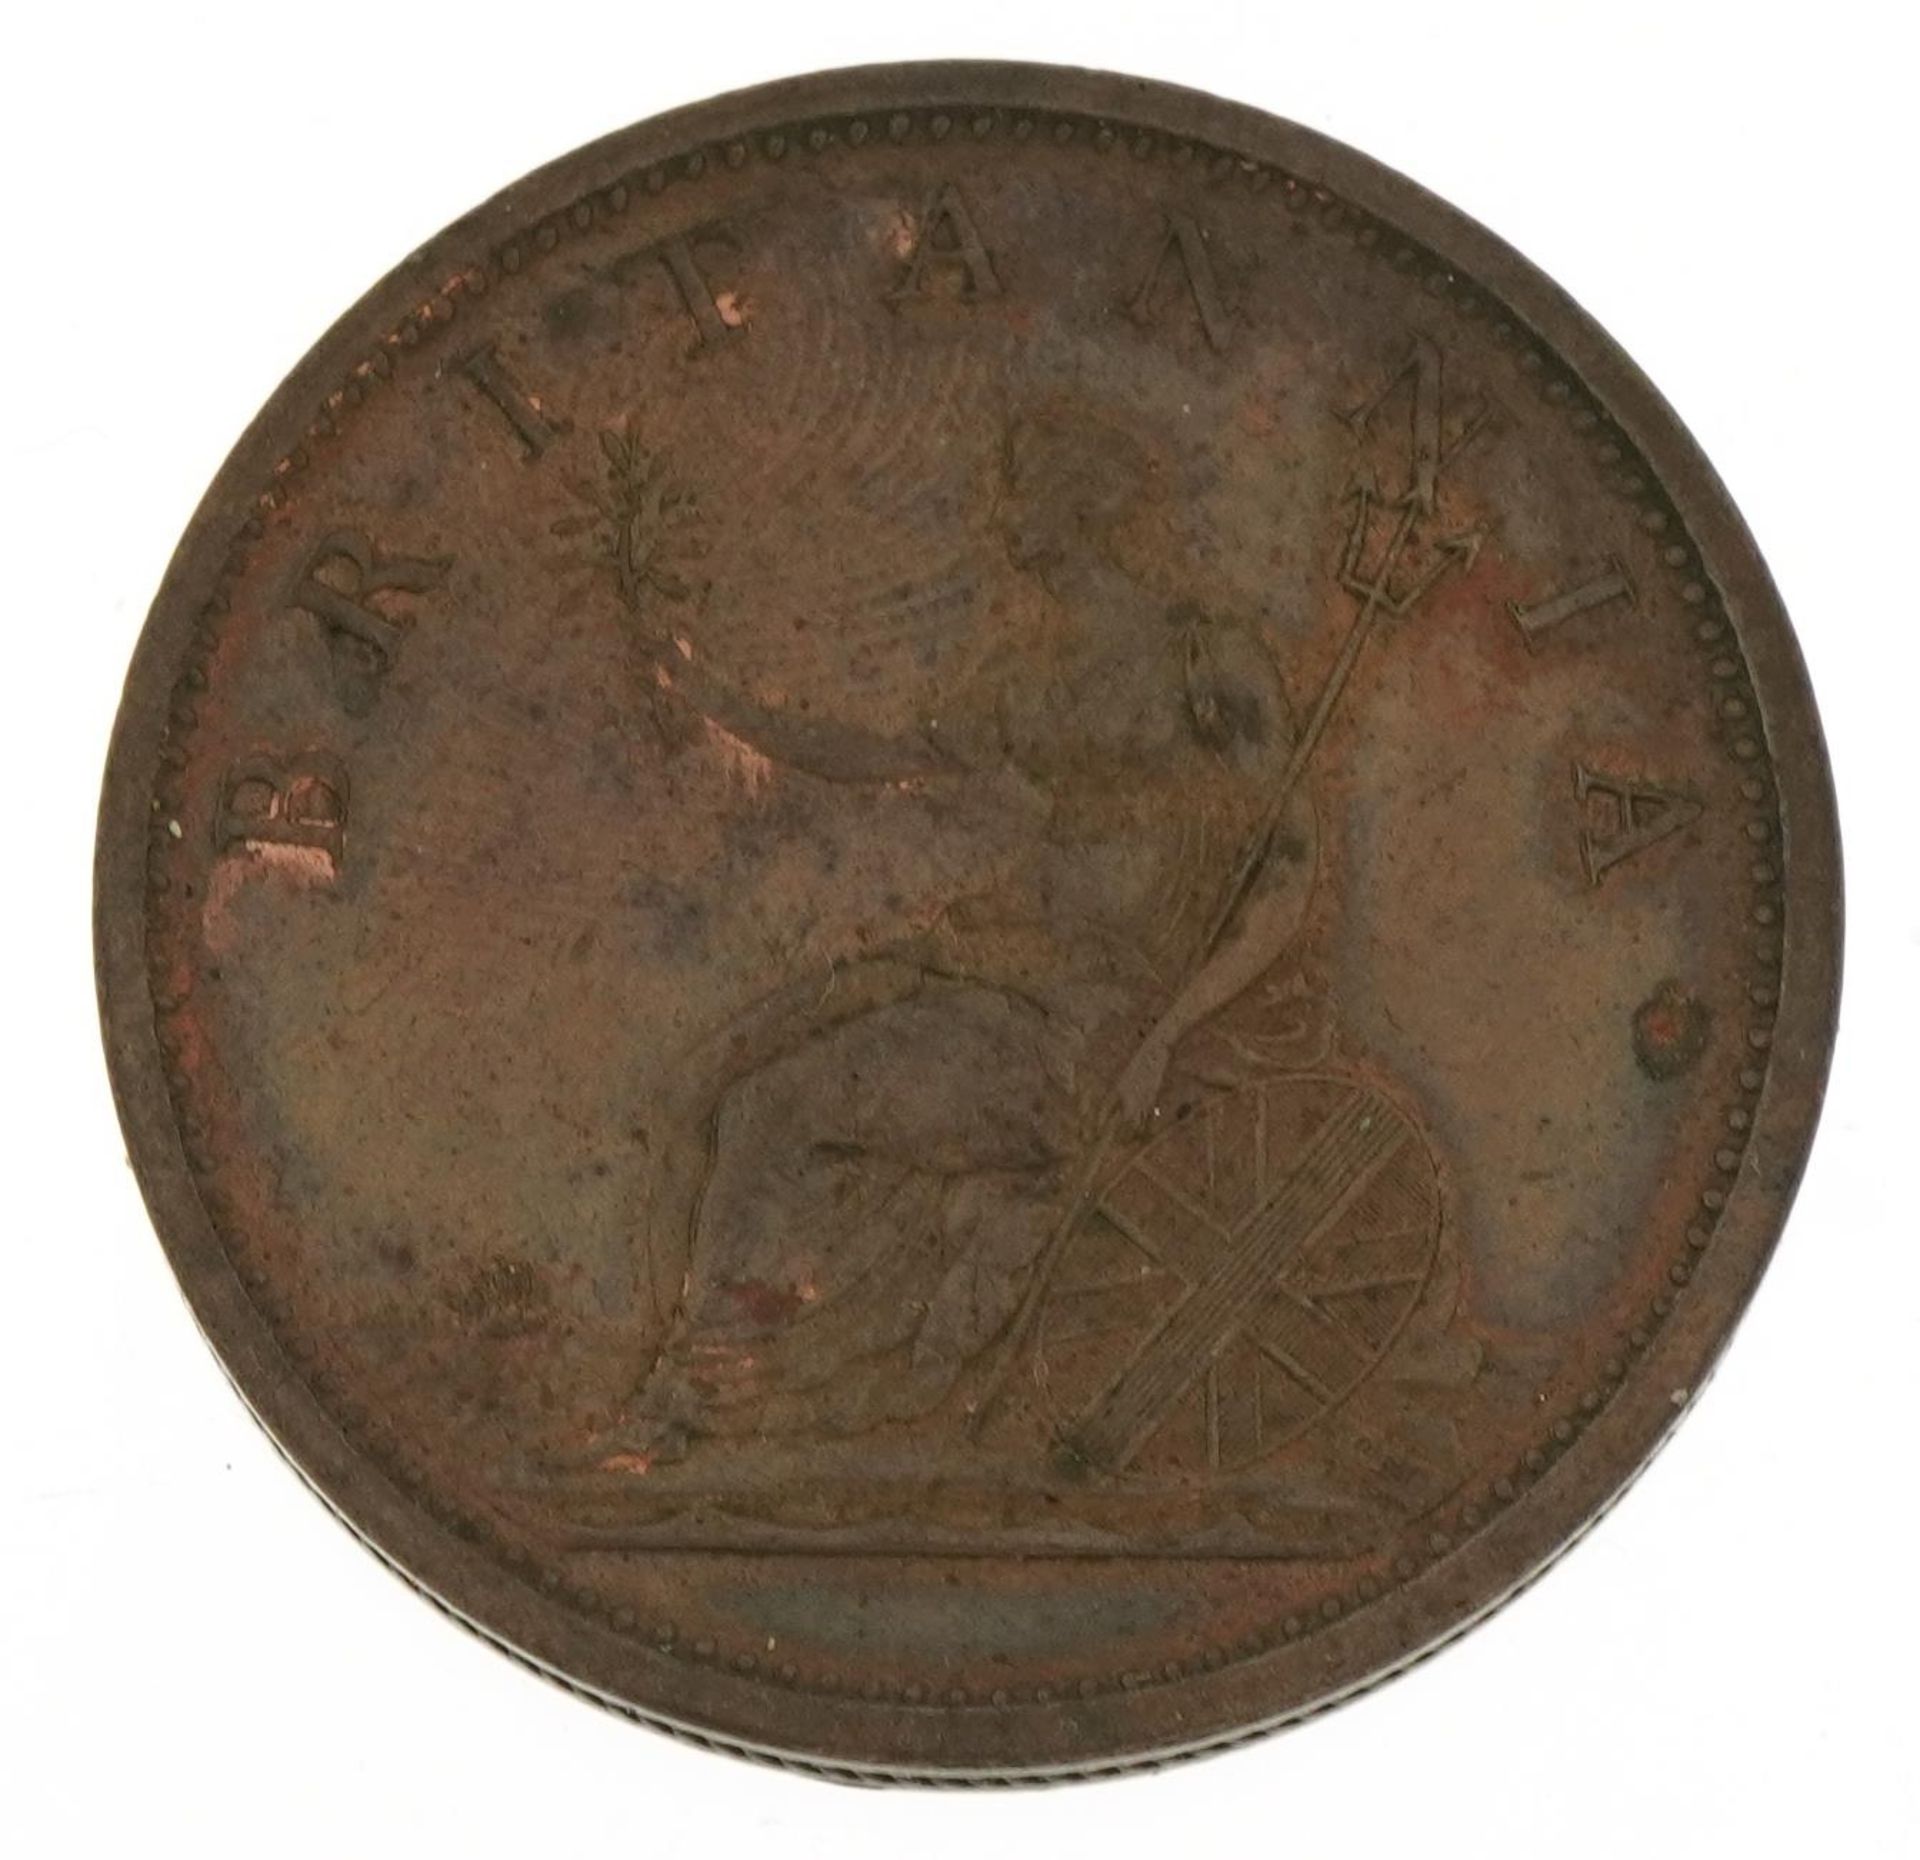 George III 1806 penny For further information on this lot please contact the auctioneer